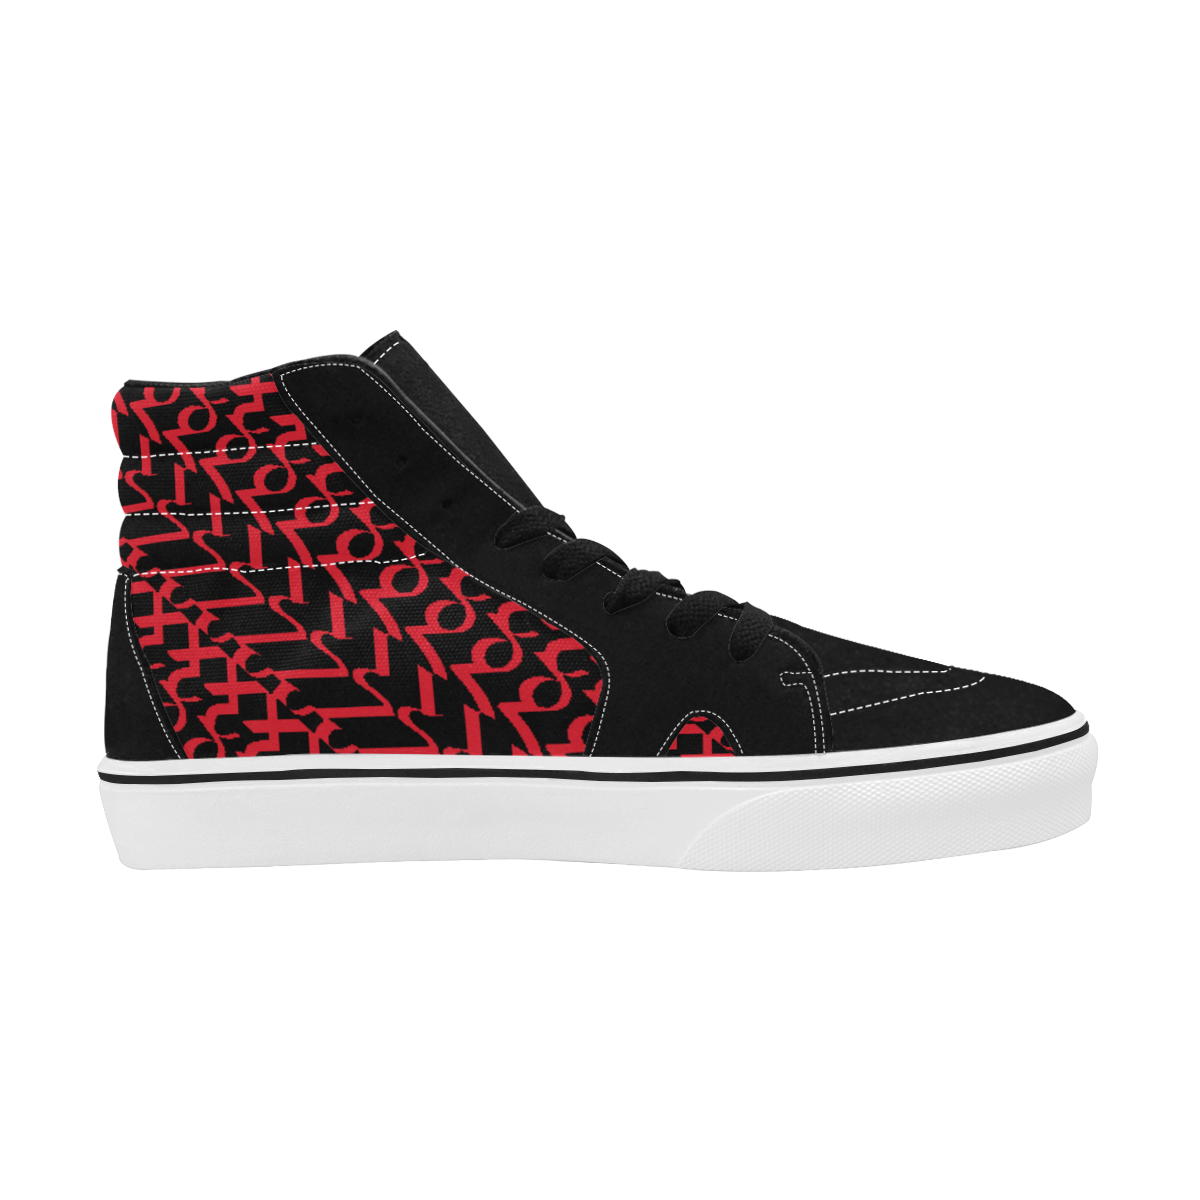 NUMBERS Collection 1234567 Red/Black Men's High Top Skateboarding Shoes (Model E001-1)